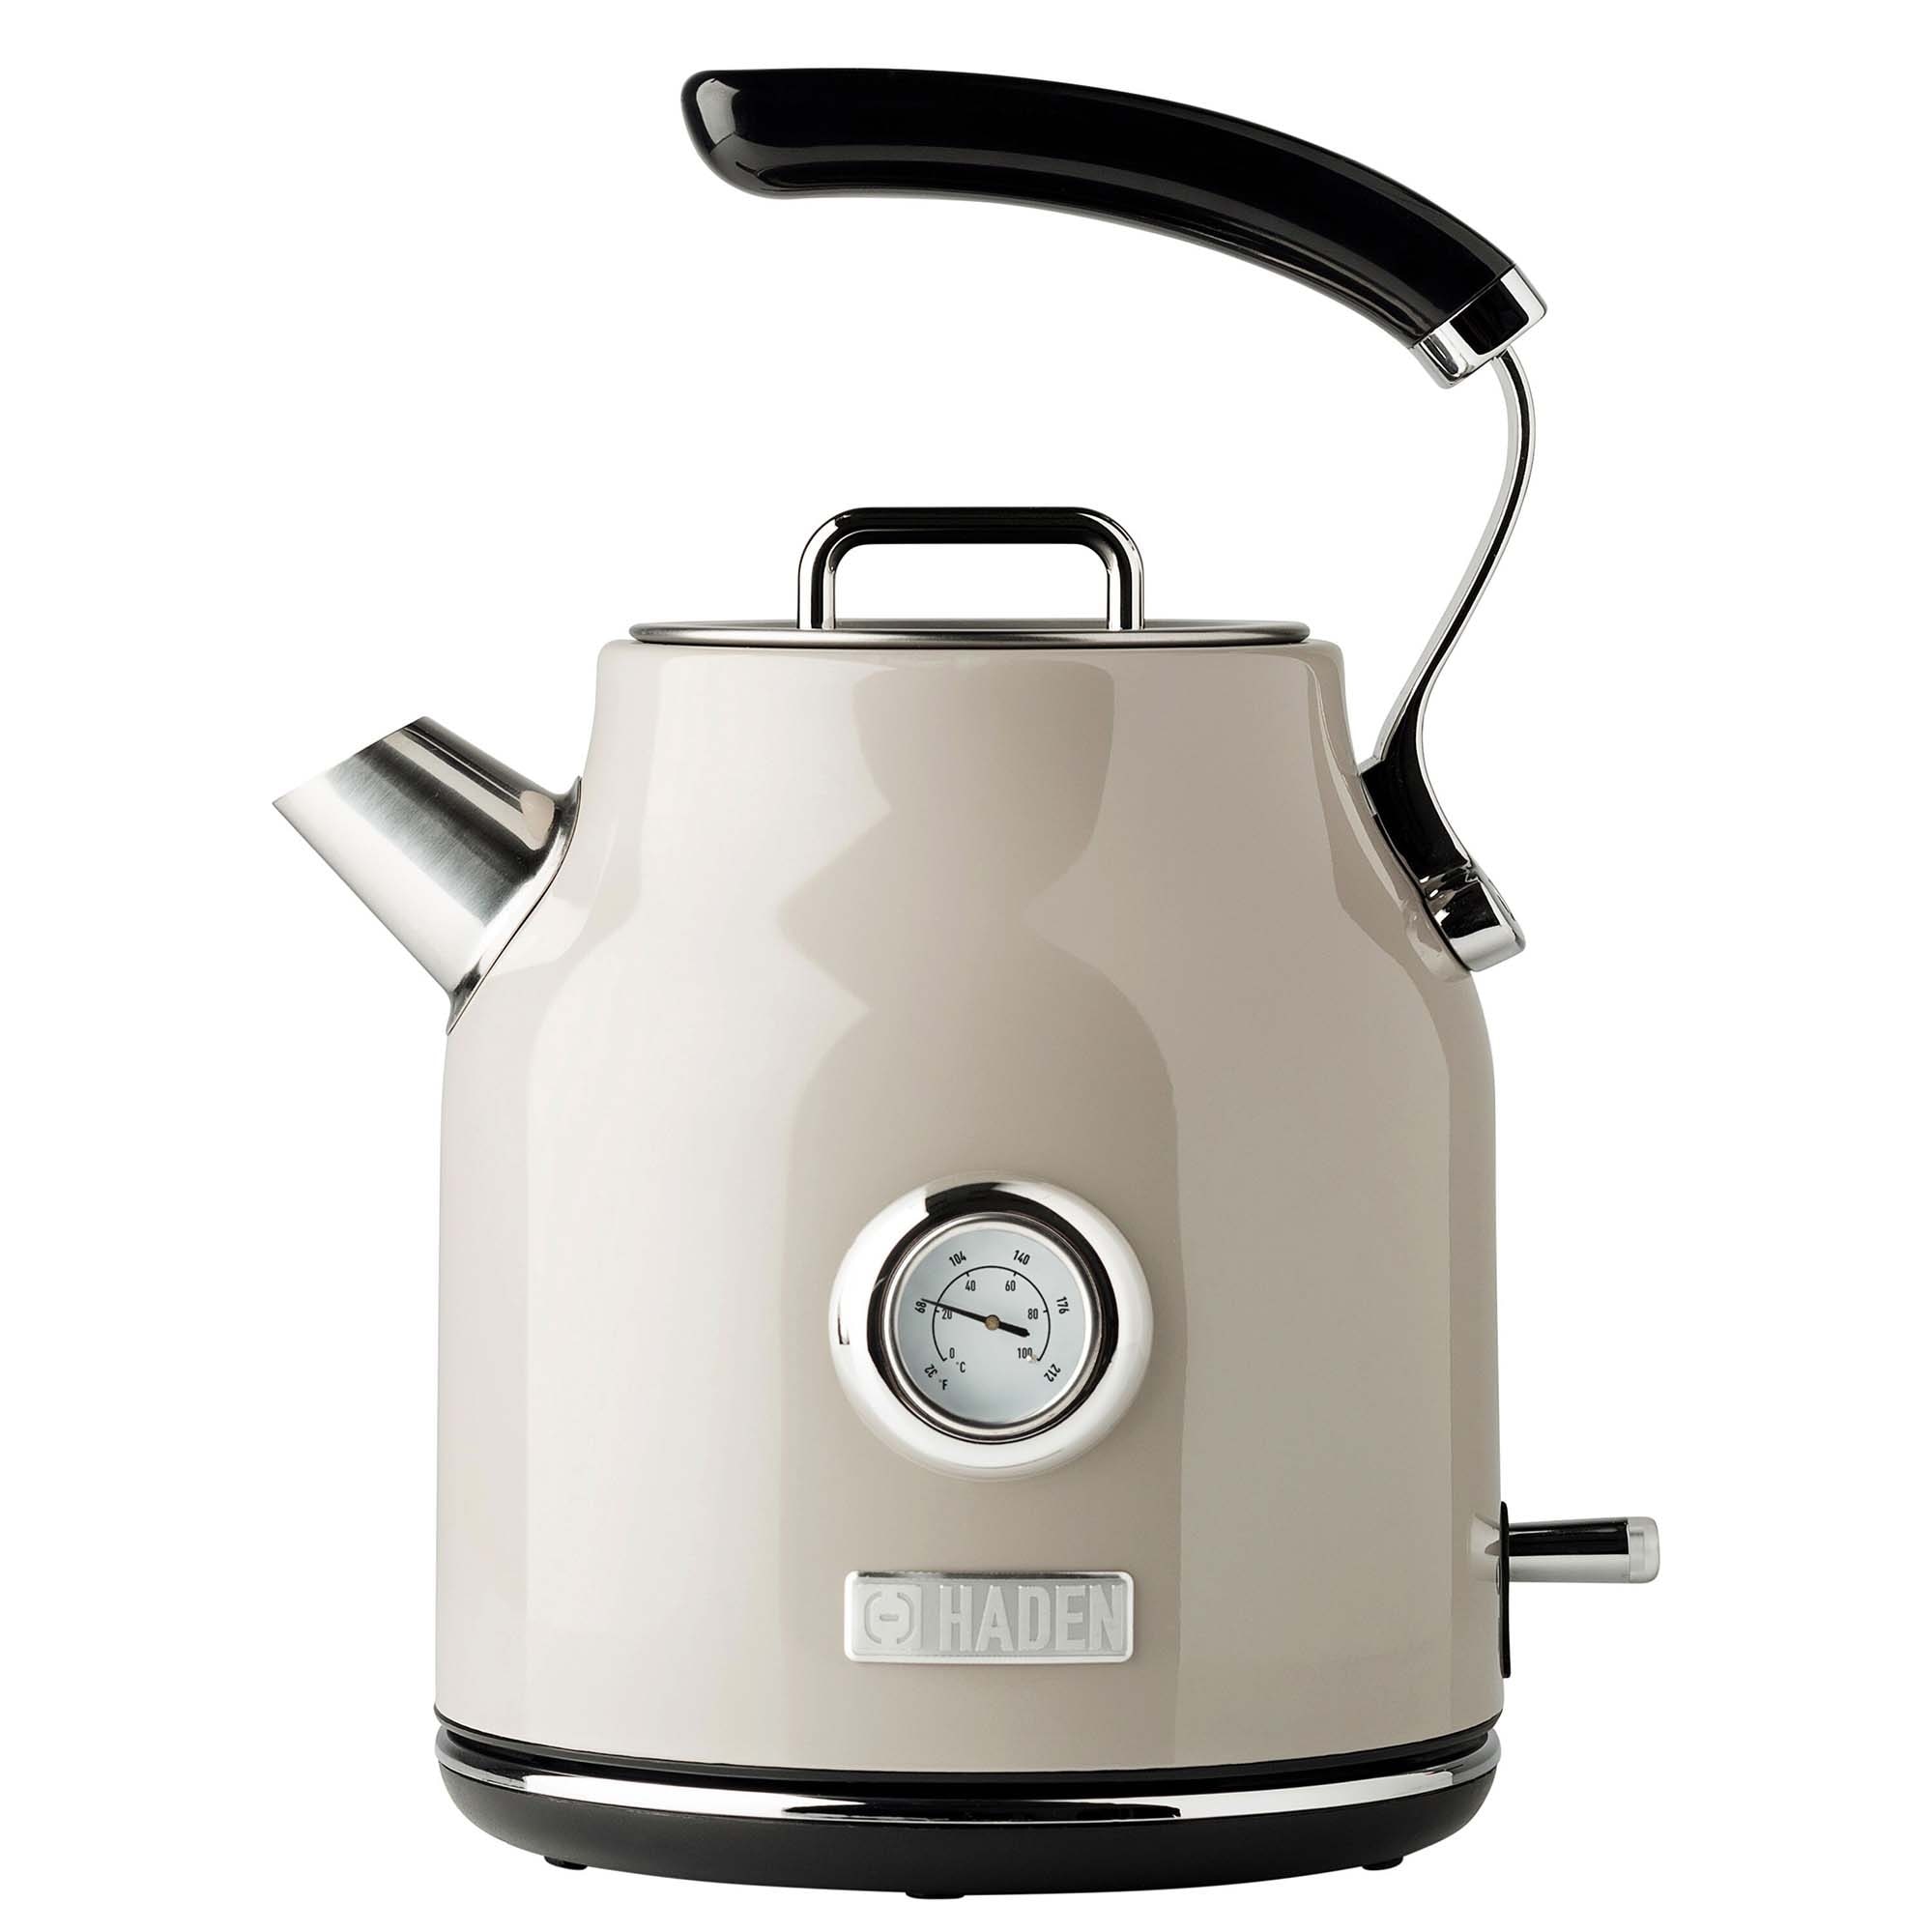 https://ak1.ostkcdn.com/images/products/is/images/direct/171eb303e75c8b097c898a8eeb64d3fbf1ca0f57/Dorset-1.7-Liter-Stainless-Steel-Electric-Kettle%2C-Putty--75002.jpg